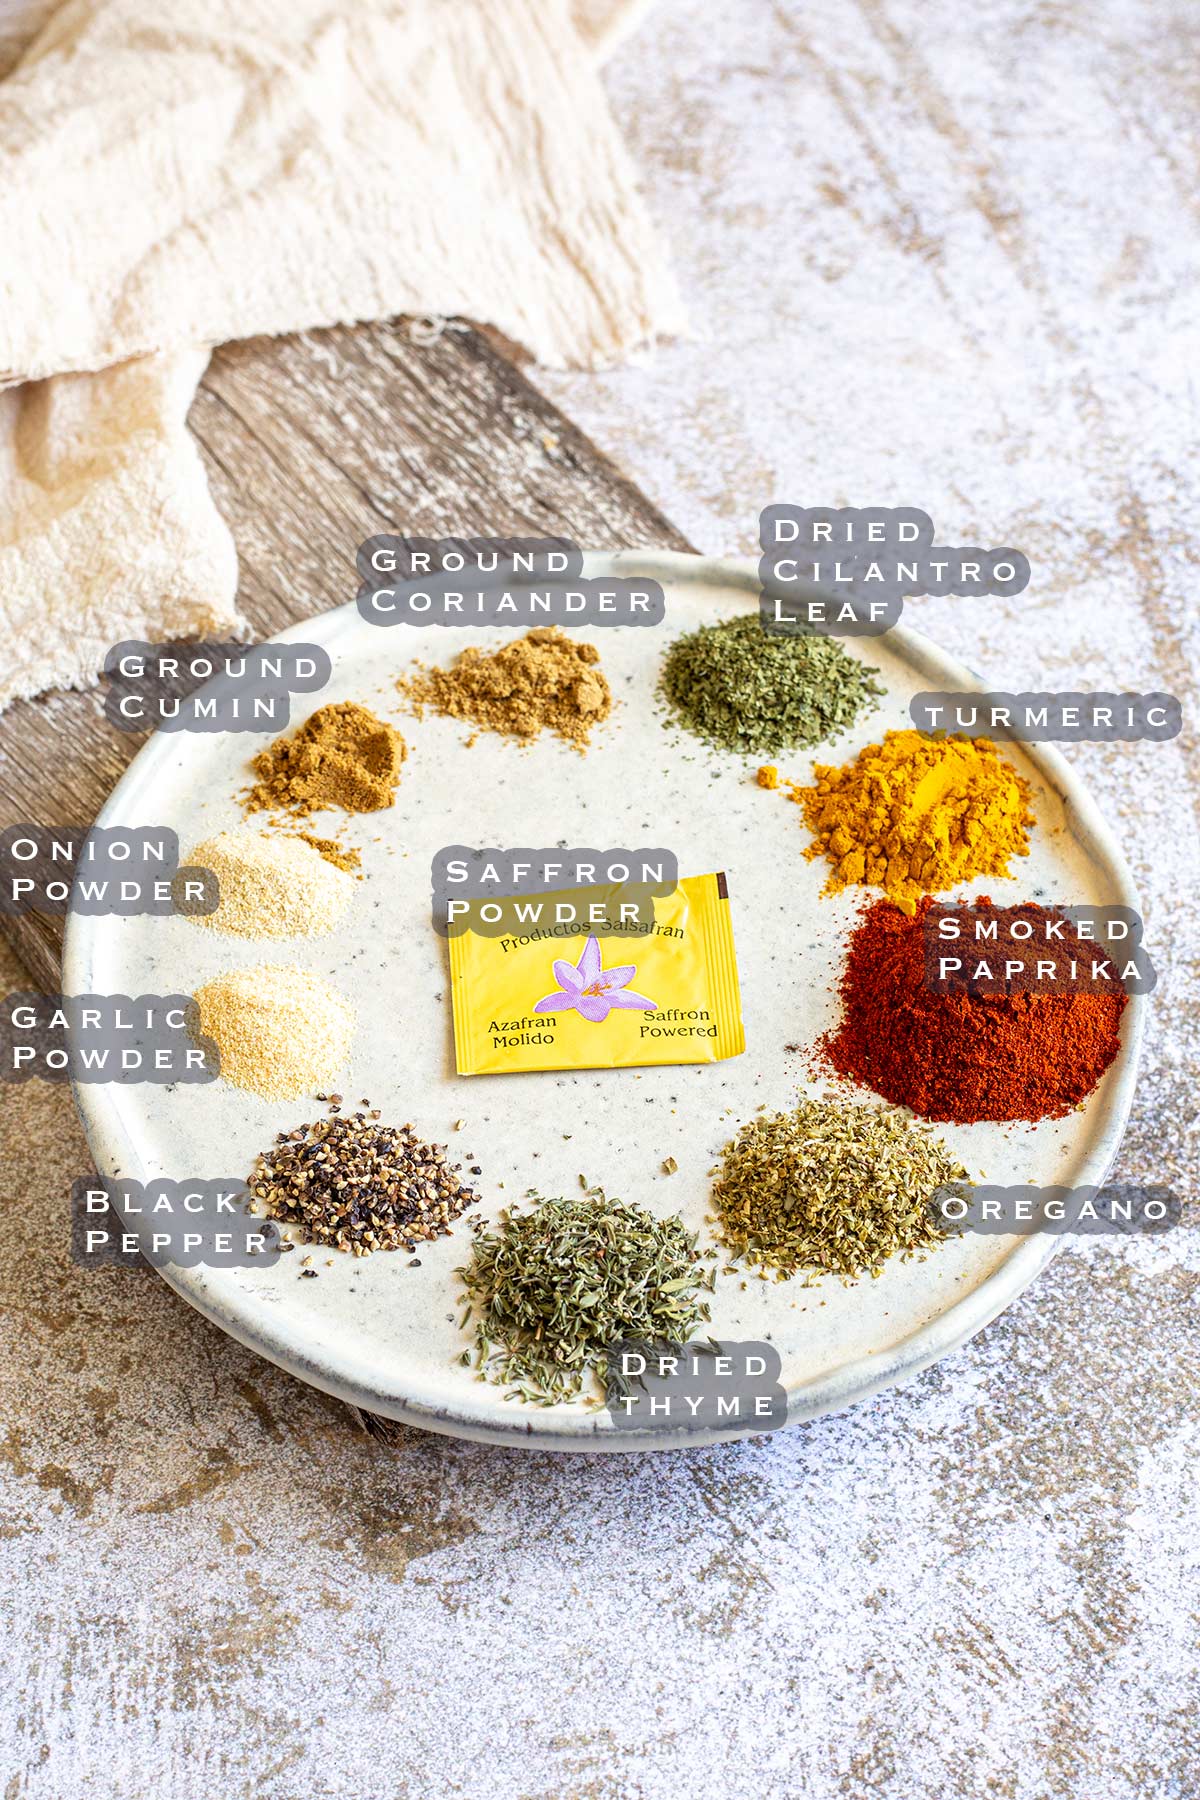 the ingredients for a Spanish seasoning portioned on a plate